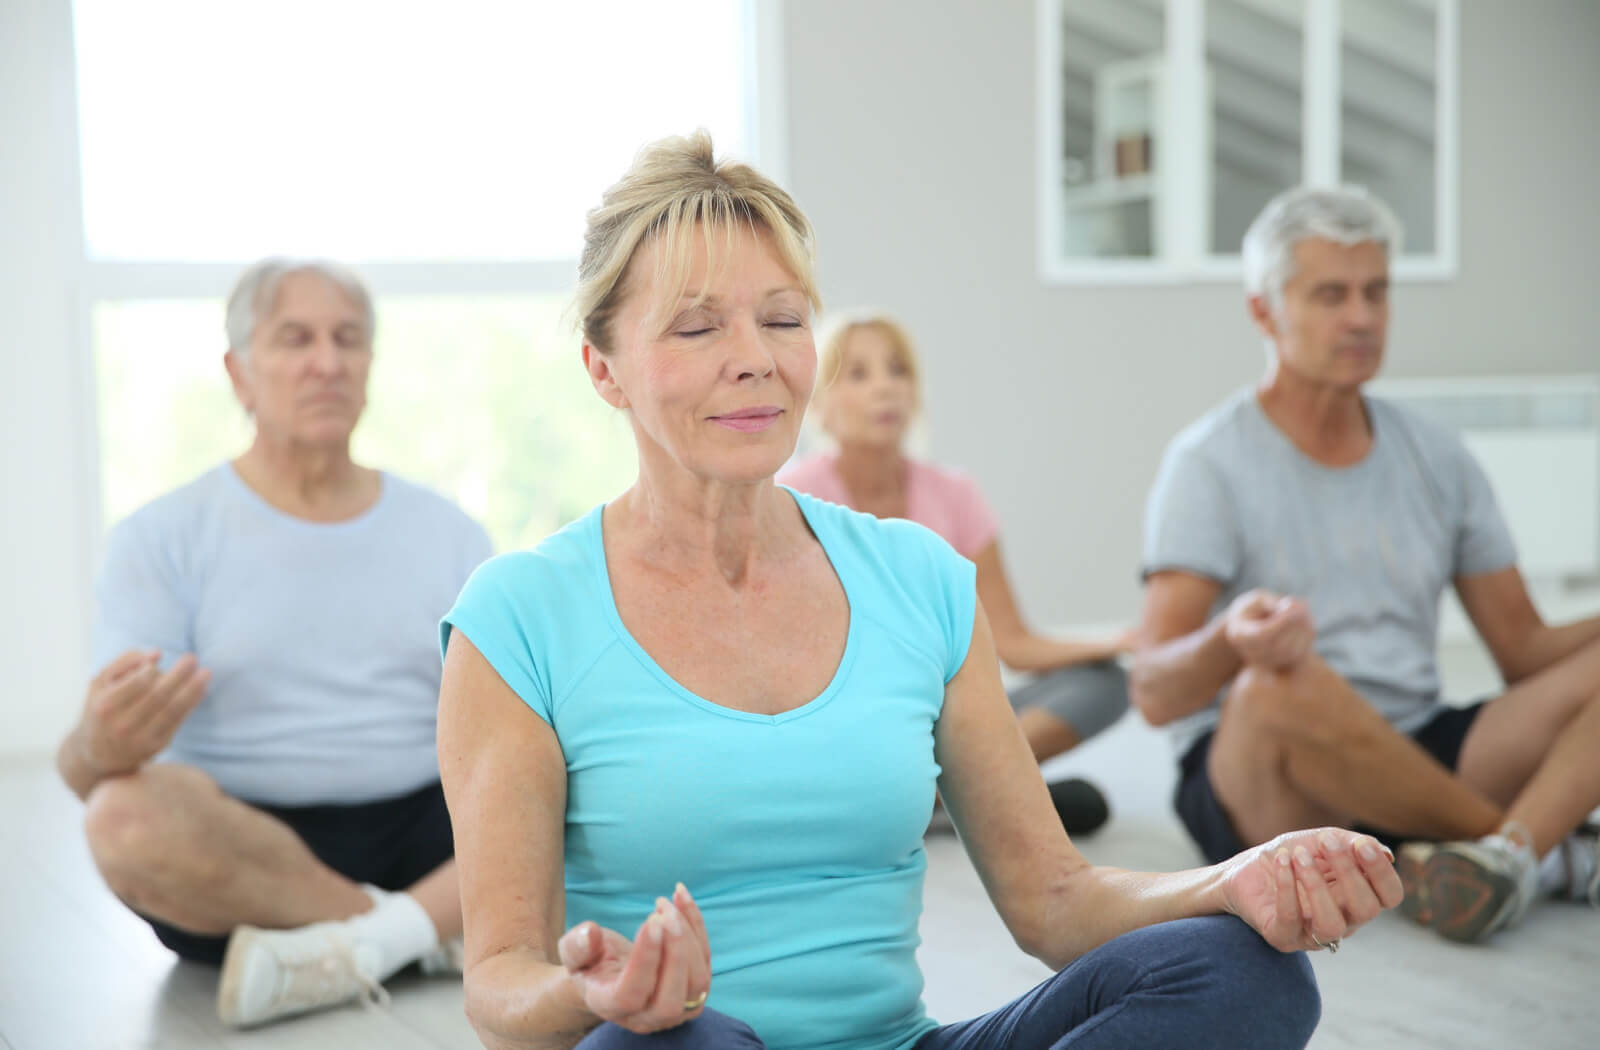 A group of older adults meditating as a part of their yoga practice.